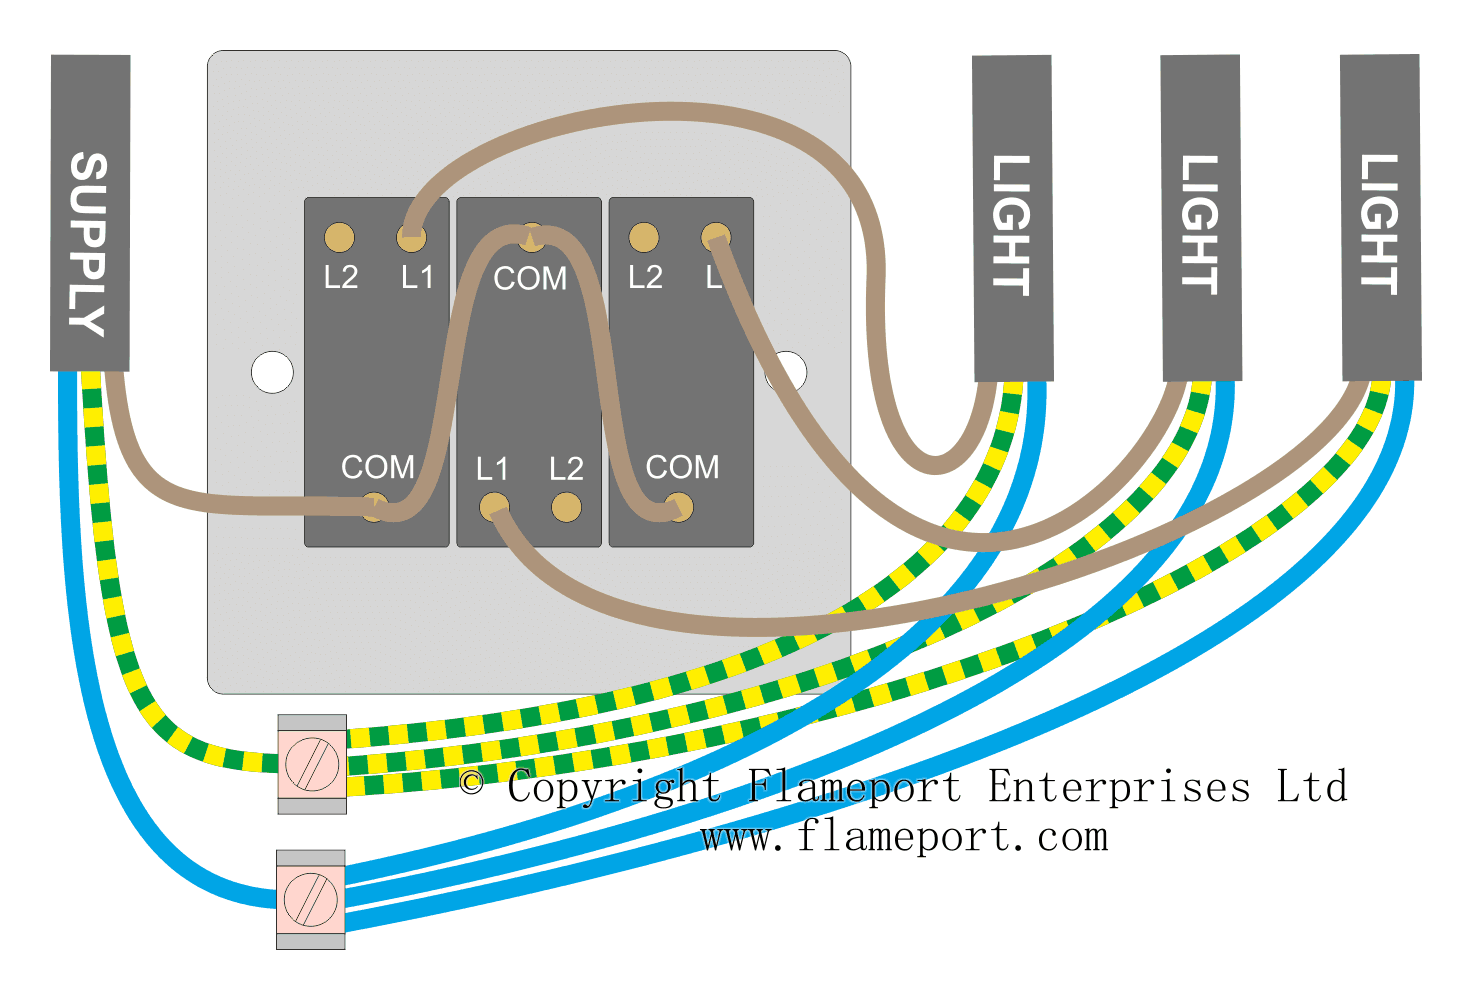 Light Switch Wiring Diagram Uk from www.flameport.com